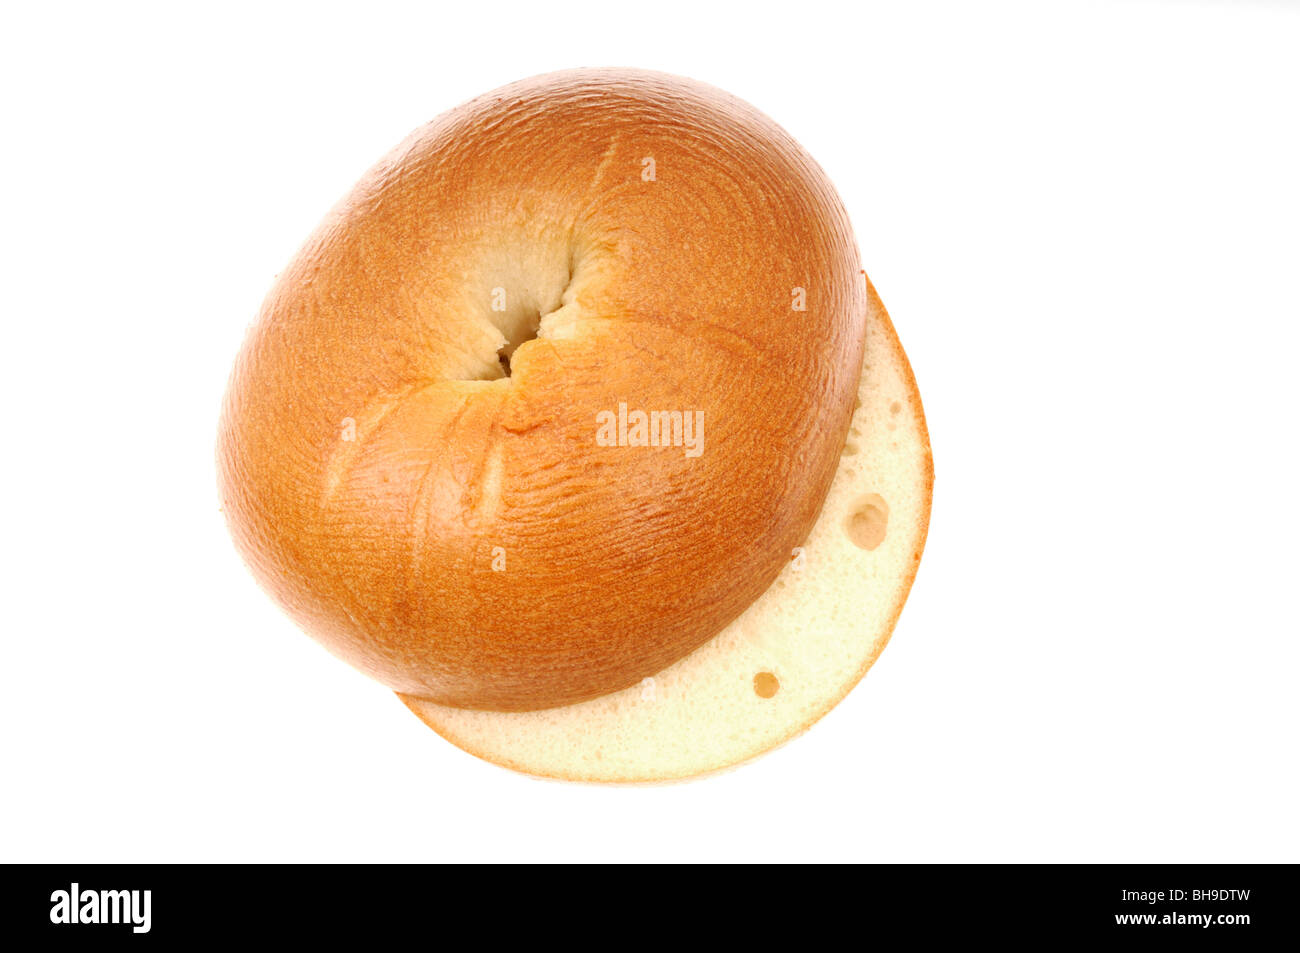 Plain bagel or beigel sliced on white background cutout. Stock Photo